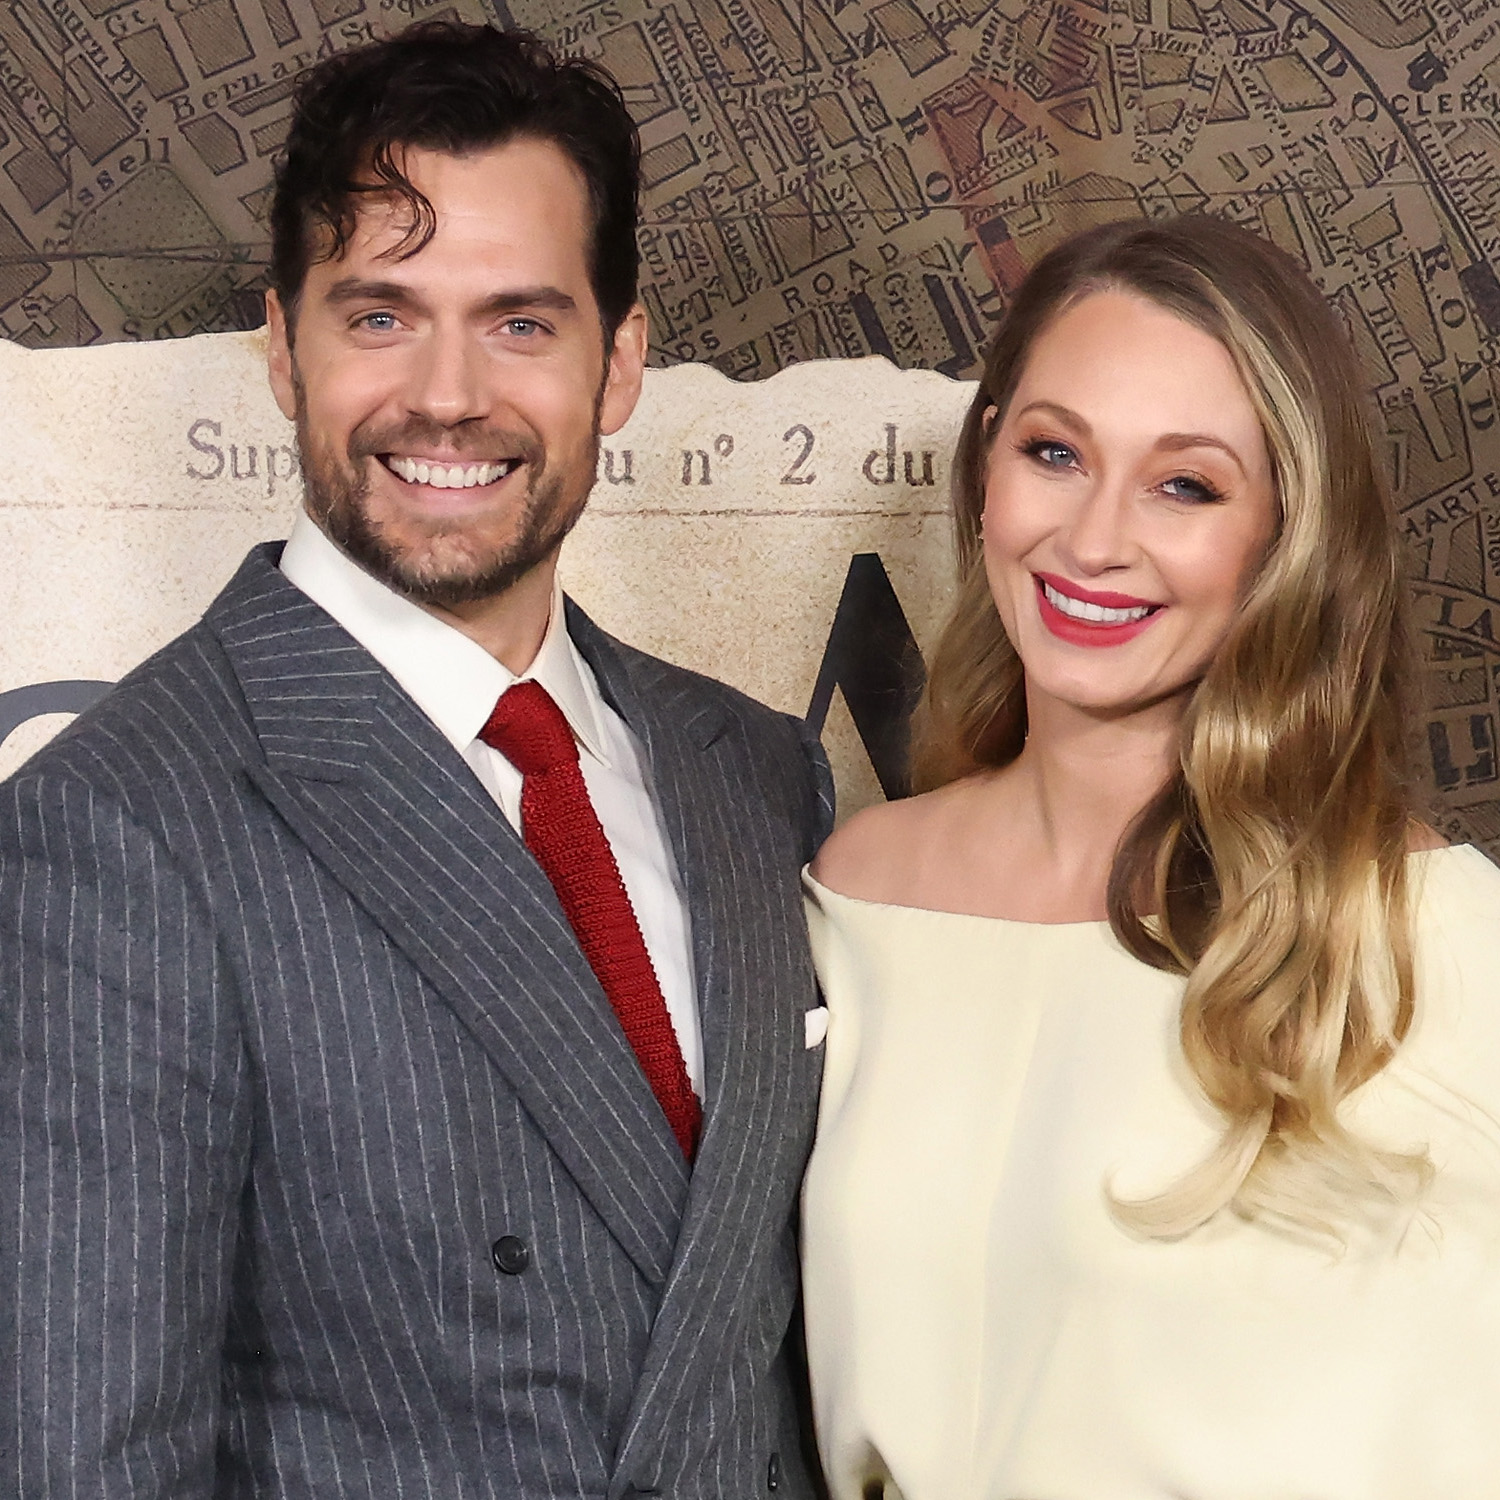 Henry Cavill Walks the Red Carpet With Girlfriend Natalie Viscuso For